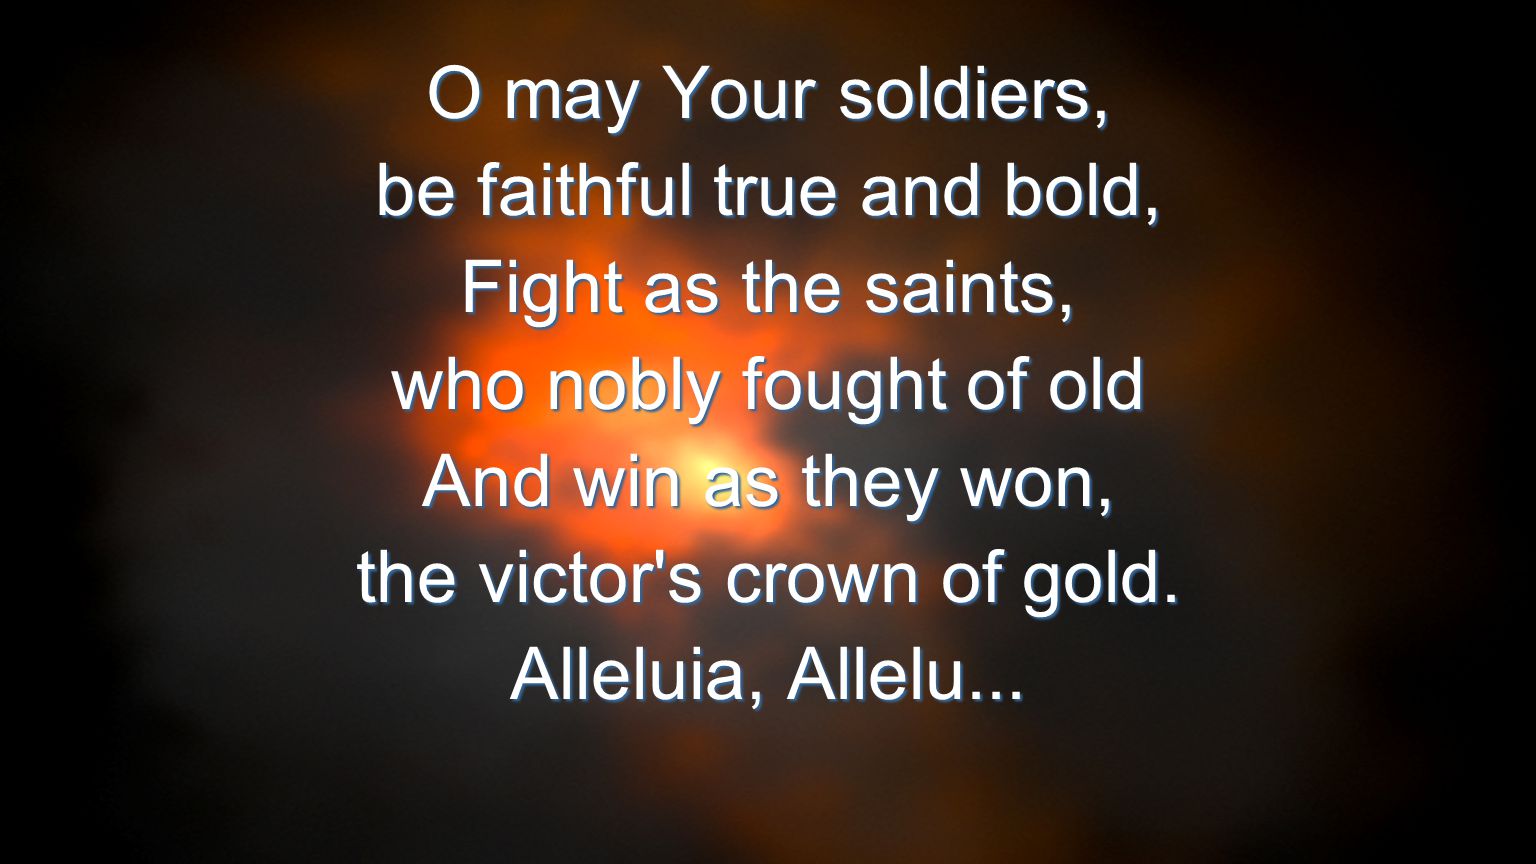 O may Your soldiers, be faithful true and bold, Fight as the saints, who nobly fought of old And win as they won, the victor s crown of gold.